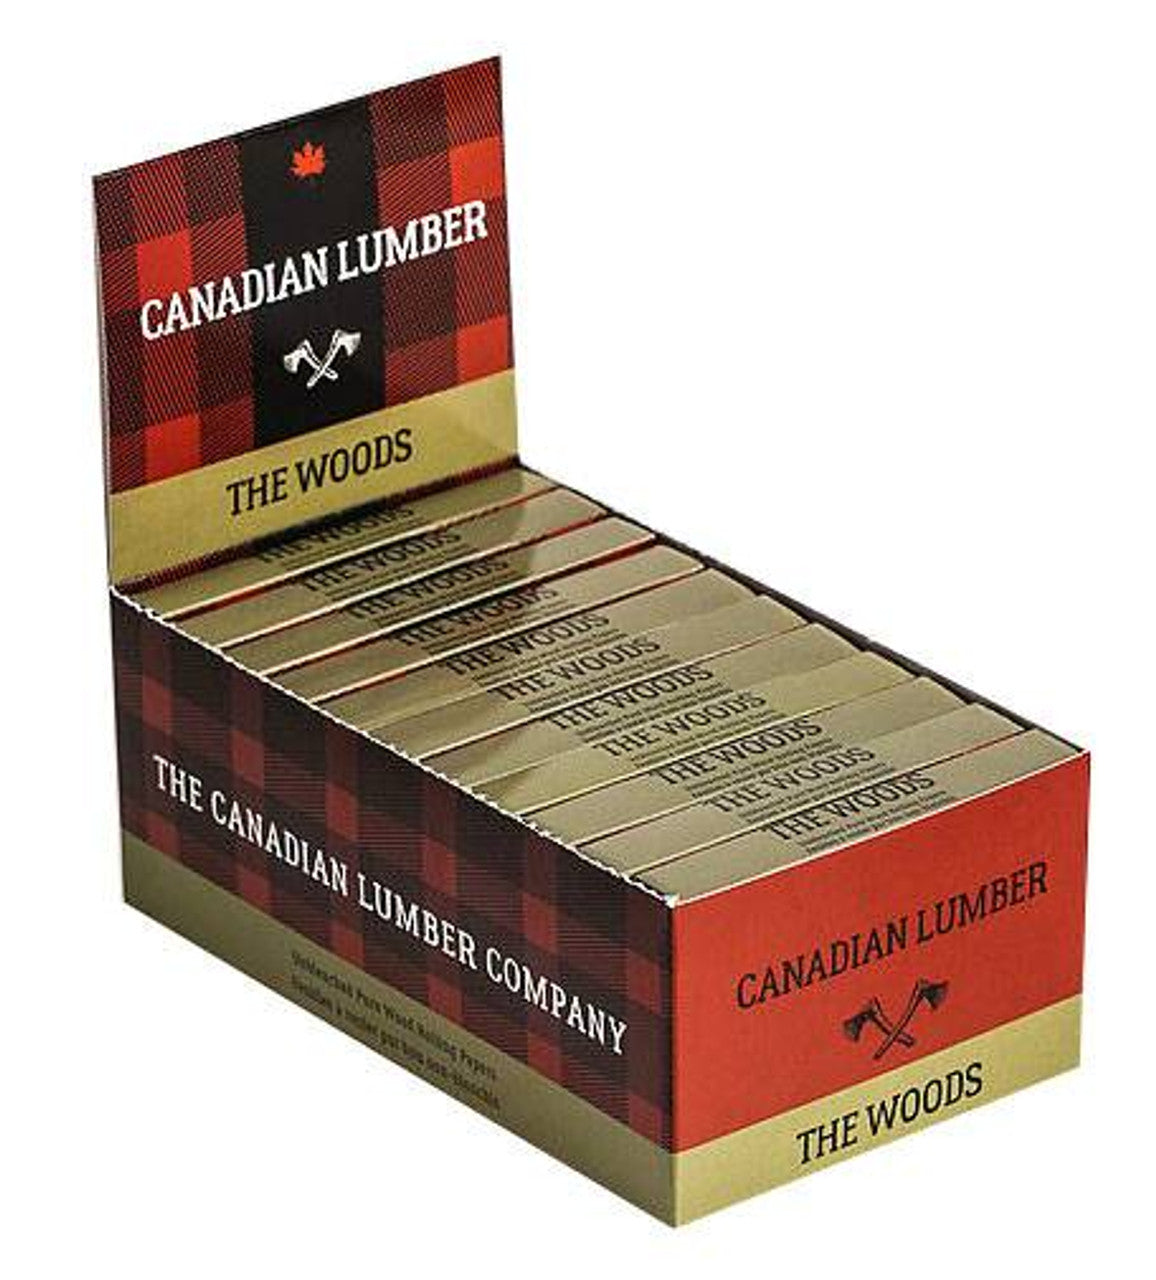 CANADIAN LUMBER WOODS UNBLEACHED PURE WOOD ROLLING PAPER 1¼" W/ TIPS  One and a quarter width, wrap enclosure including filter tips booklet with 40 leaves. 100% all natural, unbleached and untreated wood pulp paper. 12.5gsm 100% pure Arabic Gum unrefined pulp paper unbleached and unrefined filter tip paper stock